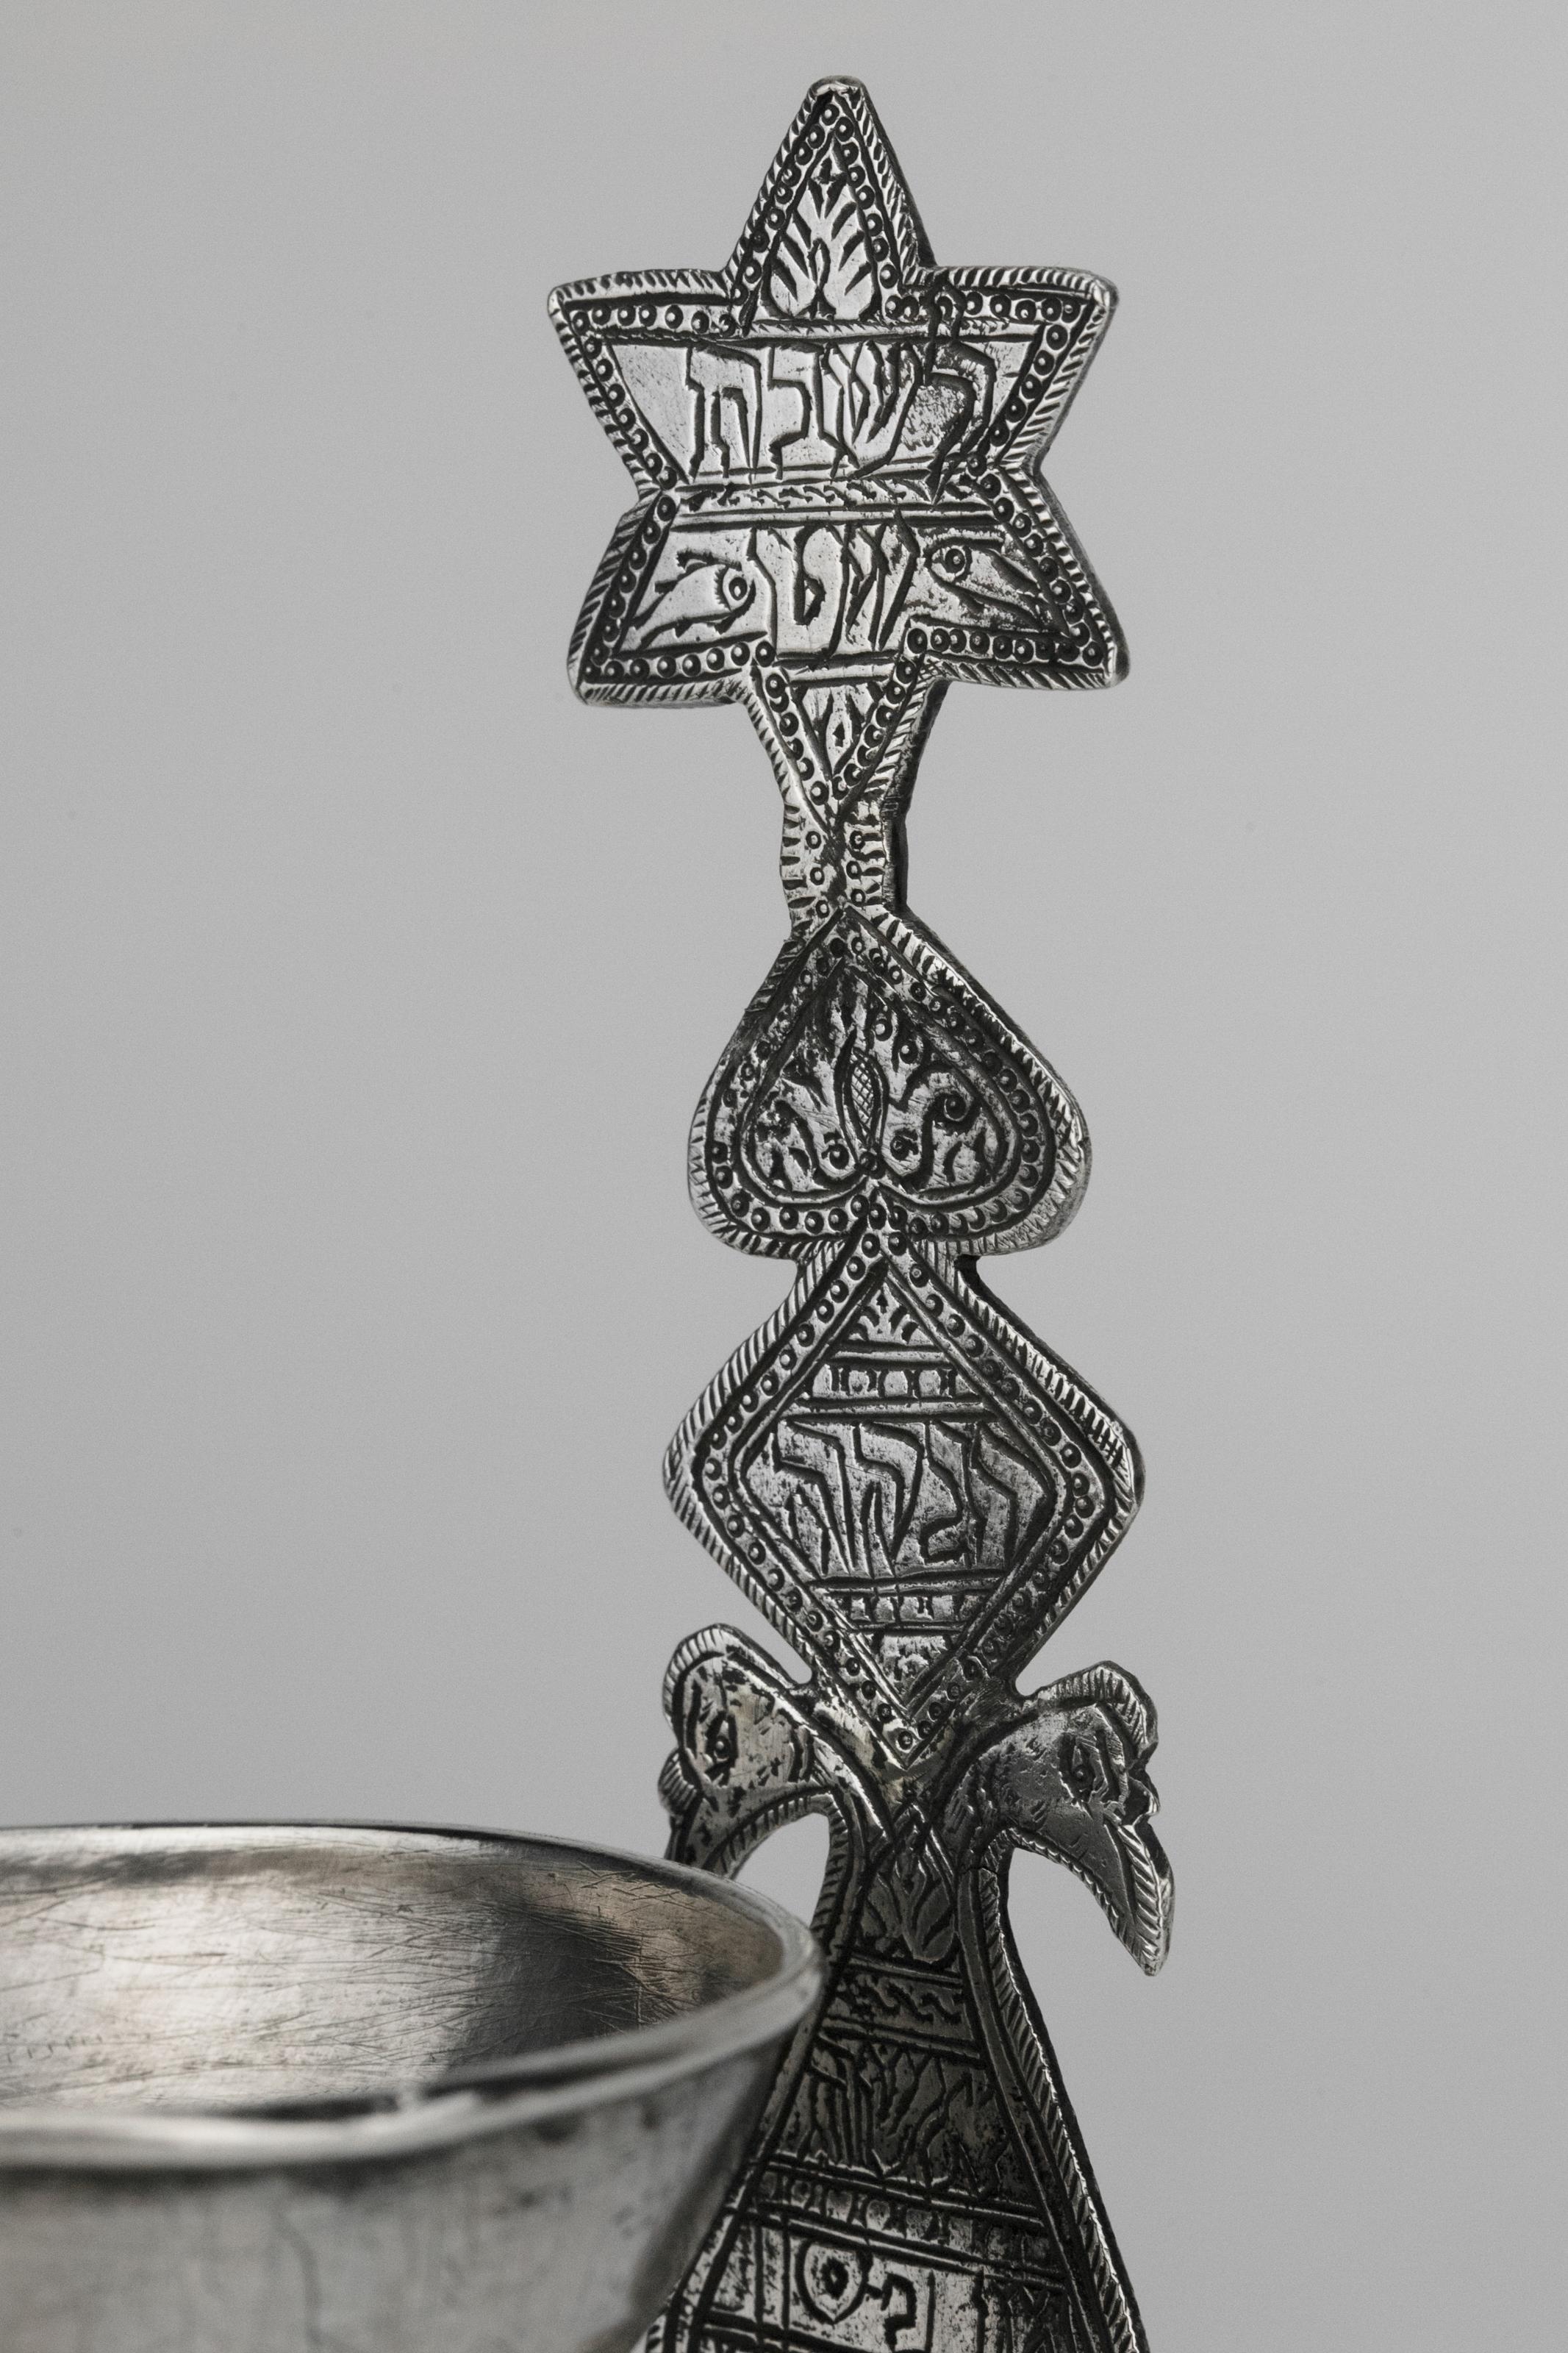 Silver Sabbath oil lamp, Afghanistan, late 19th century. 
Featuring a rimmed bowl elevated on a paneled stem, with larger drip pan below, resting on three feet. Extended piece of hand cut silver at rear, with Hebrew engraving inside the Star of